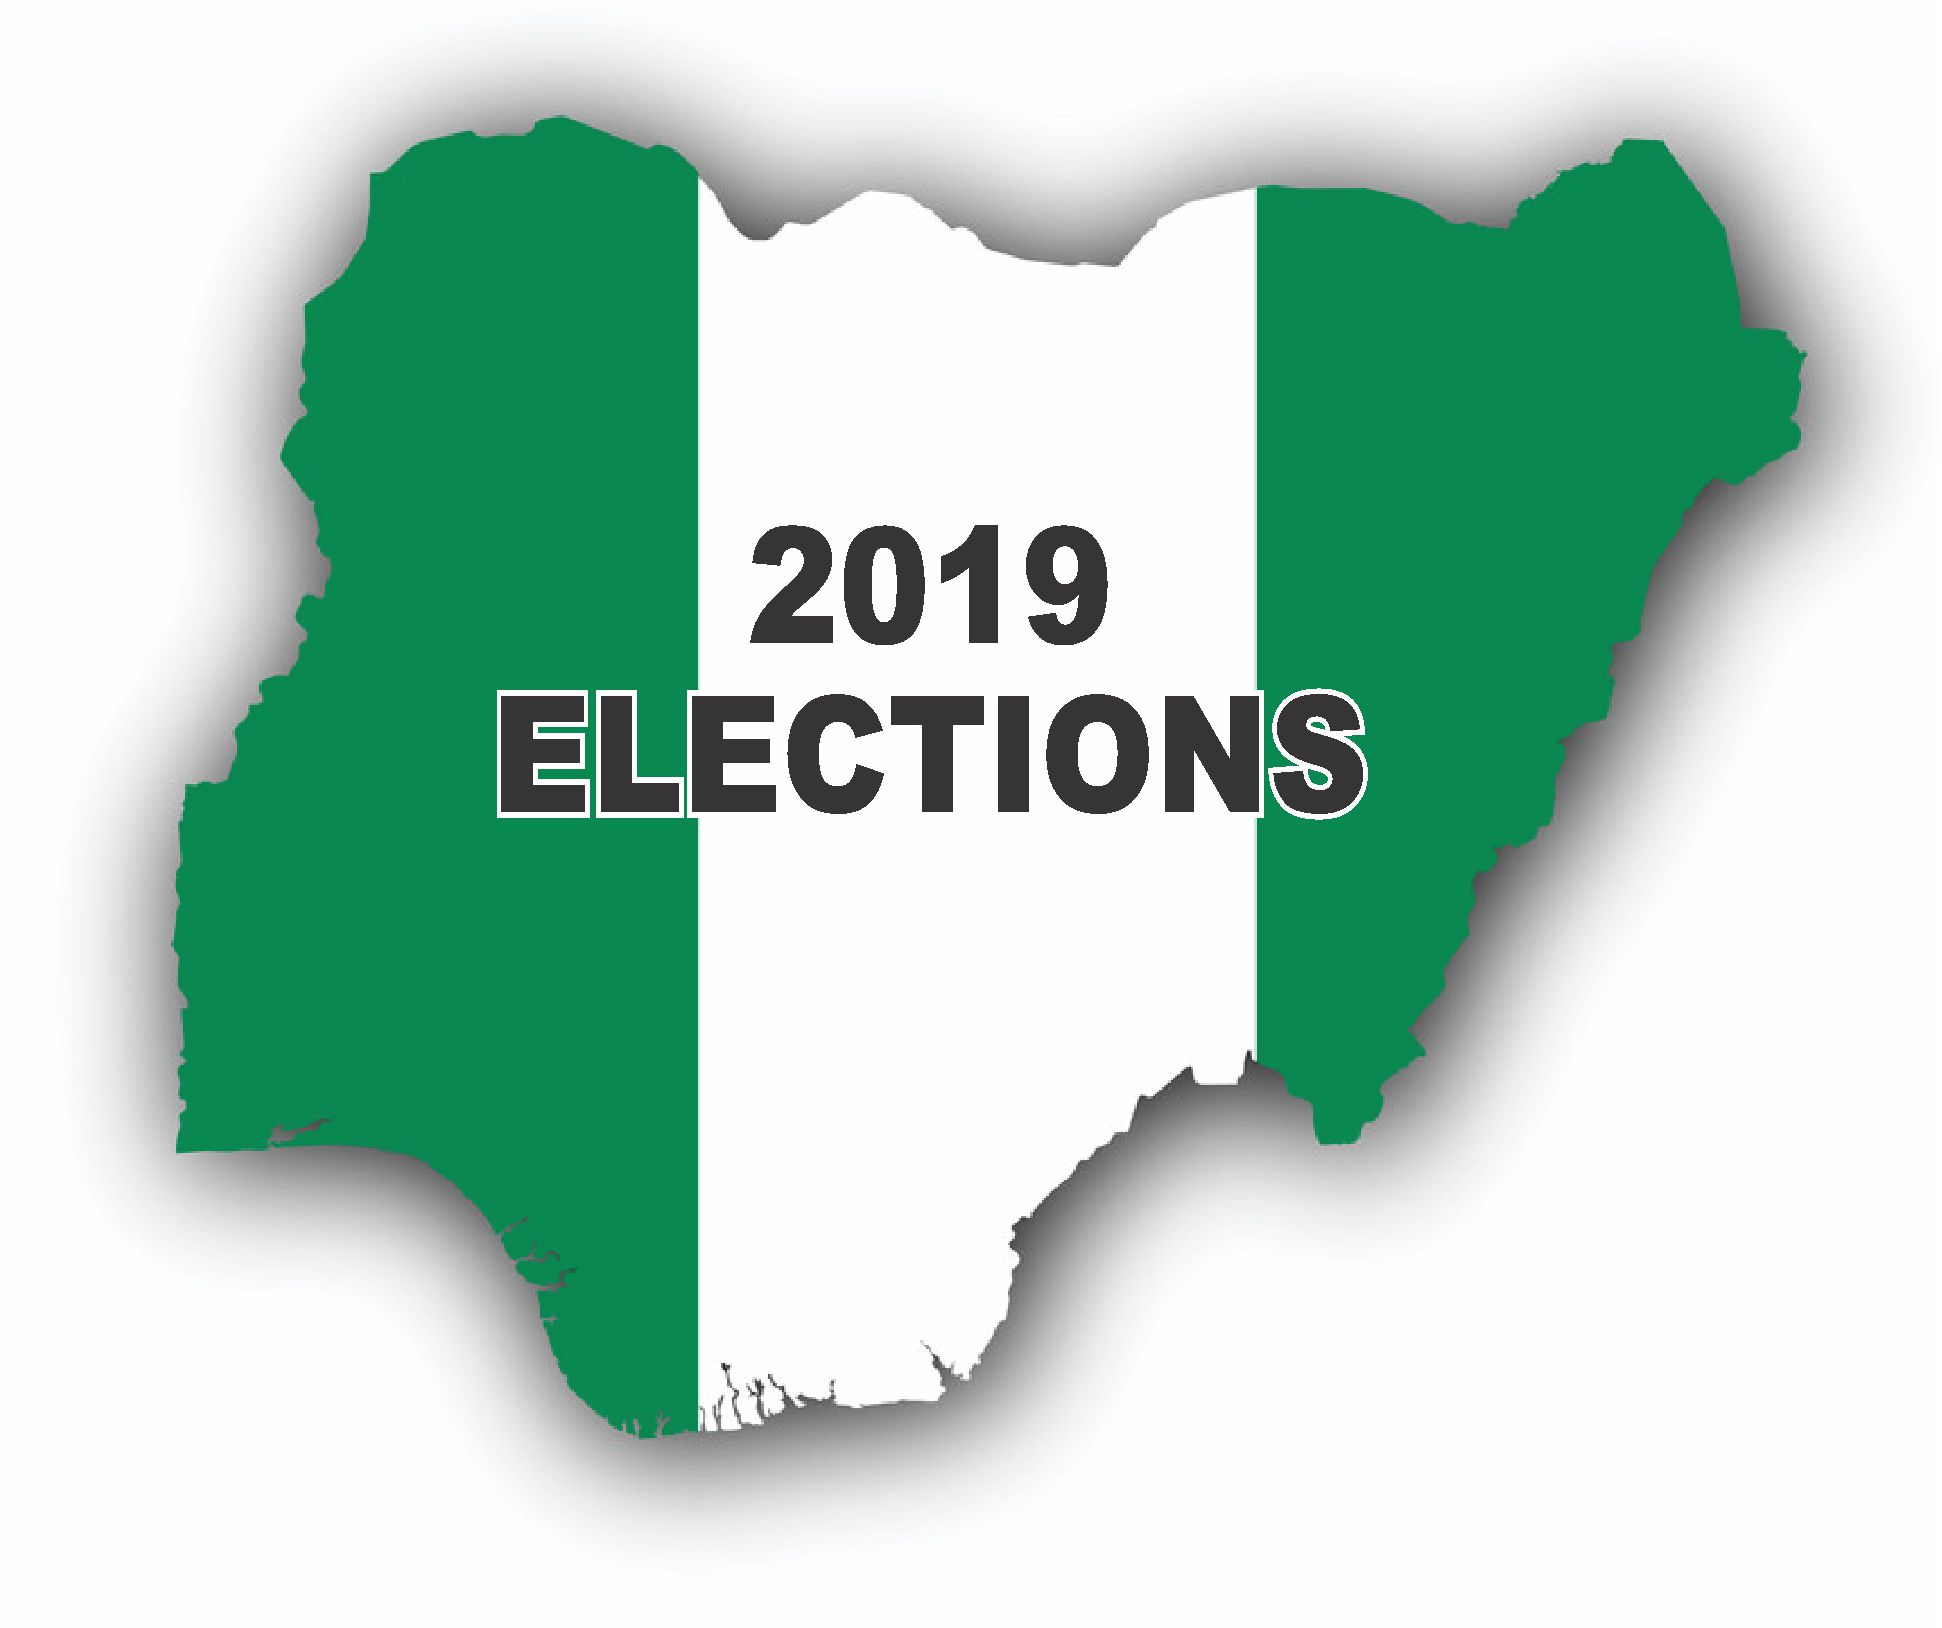 HOW TO STAY SAFE DURING THE UPCOMING NIGERIA ELECTIONS